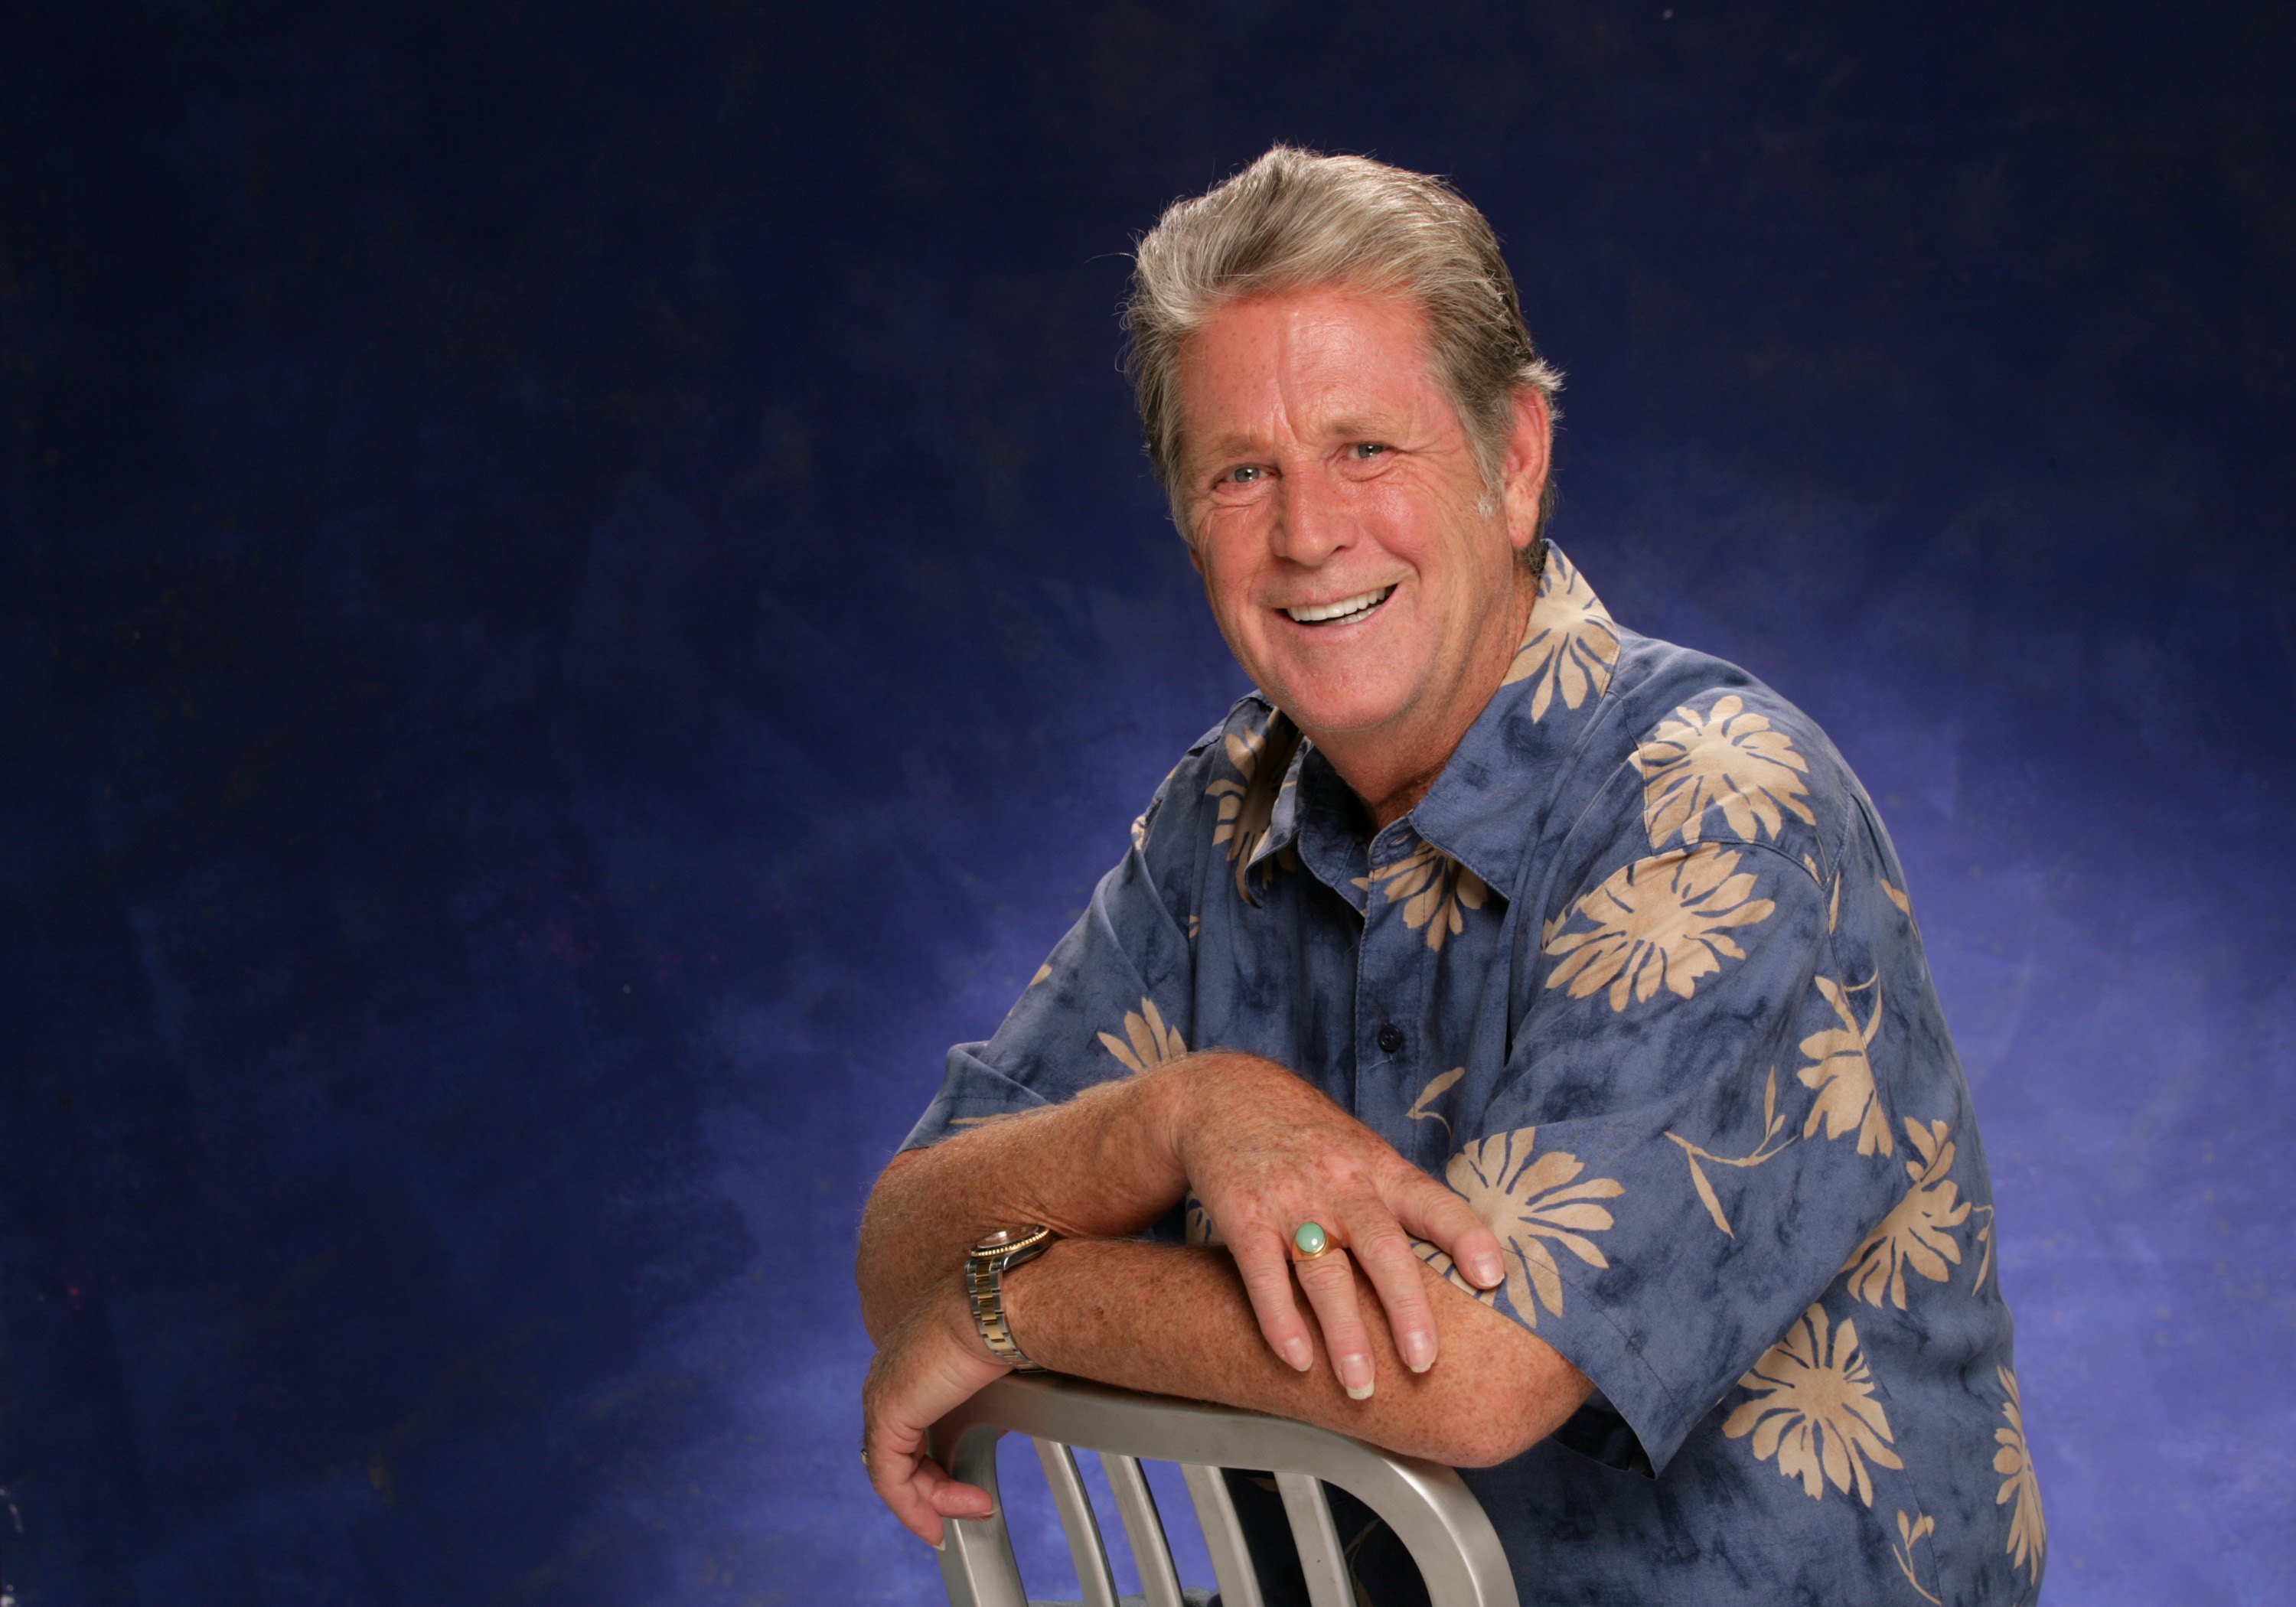 Singer, songwriter, and founding member of The Beach Boys, Brian Wilson poses for a Portrait session